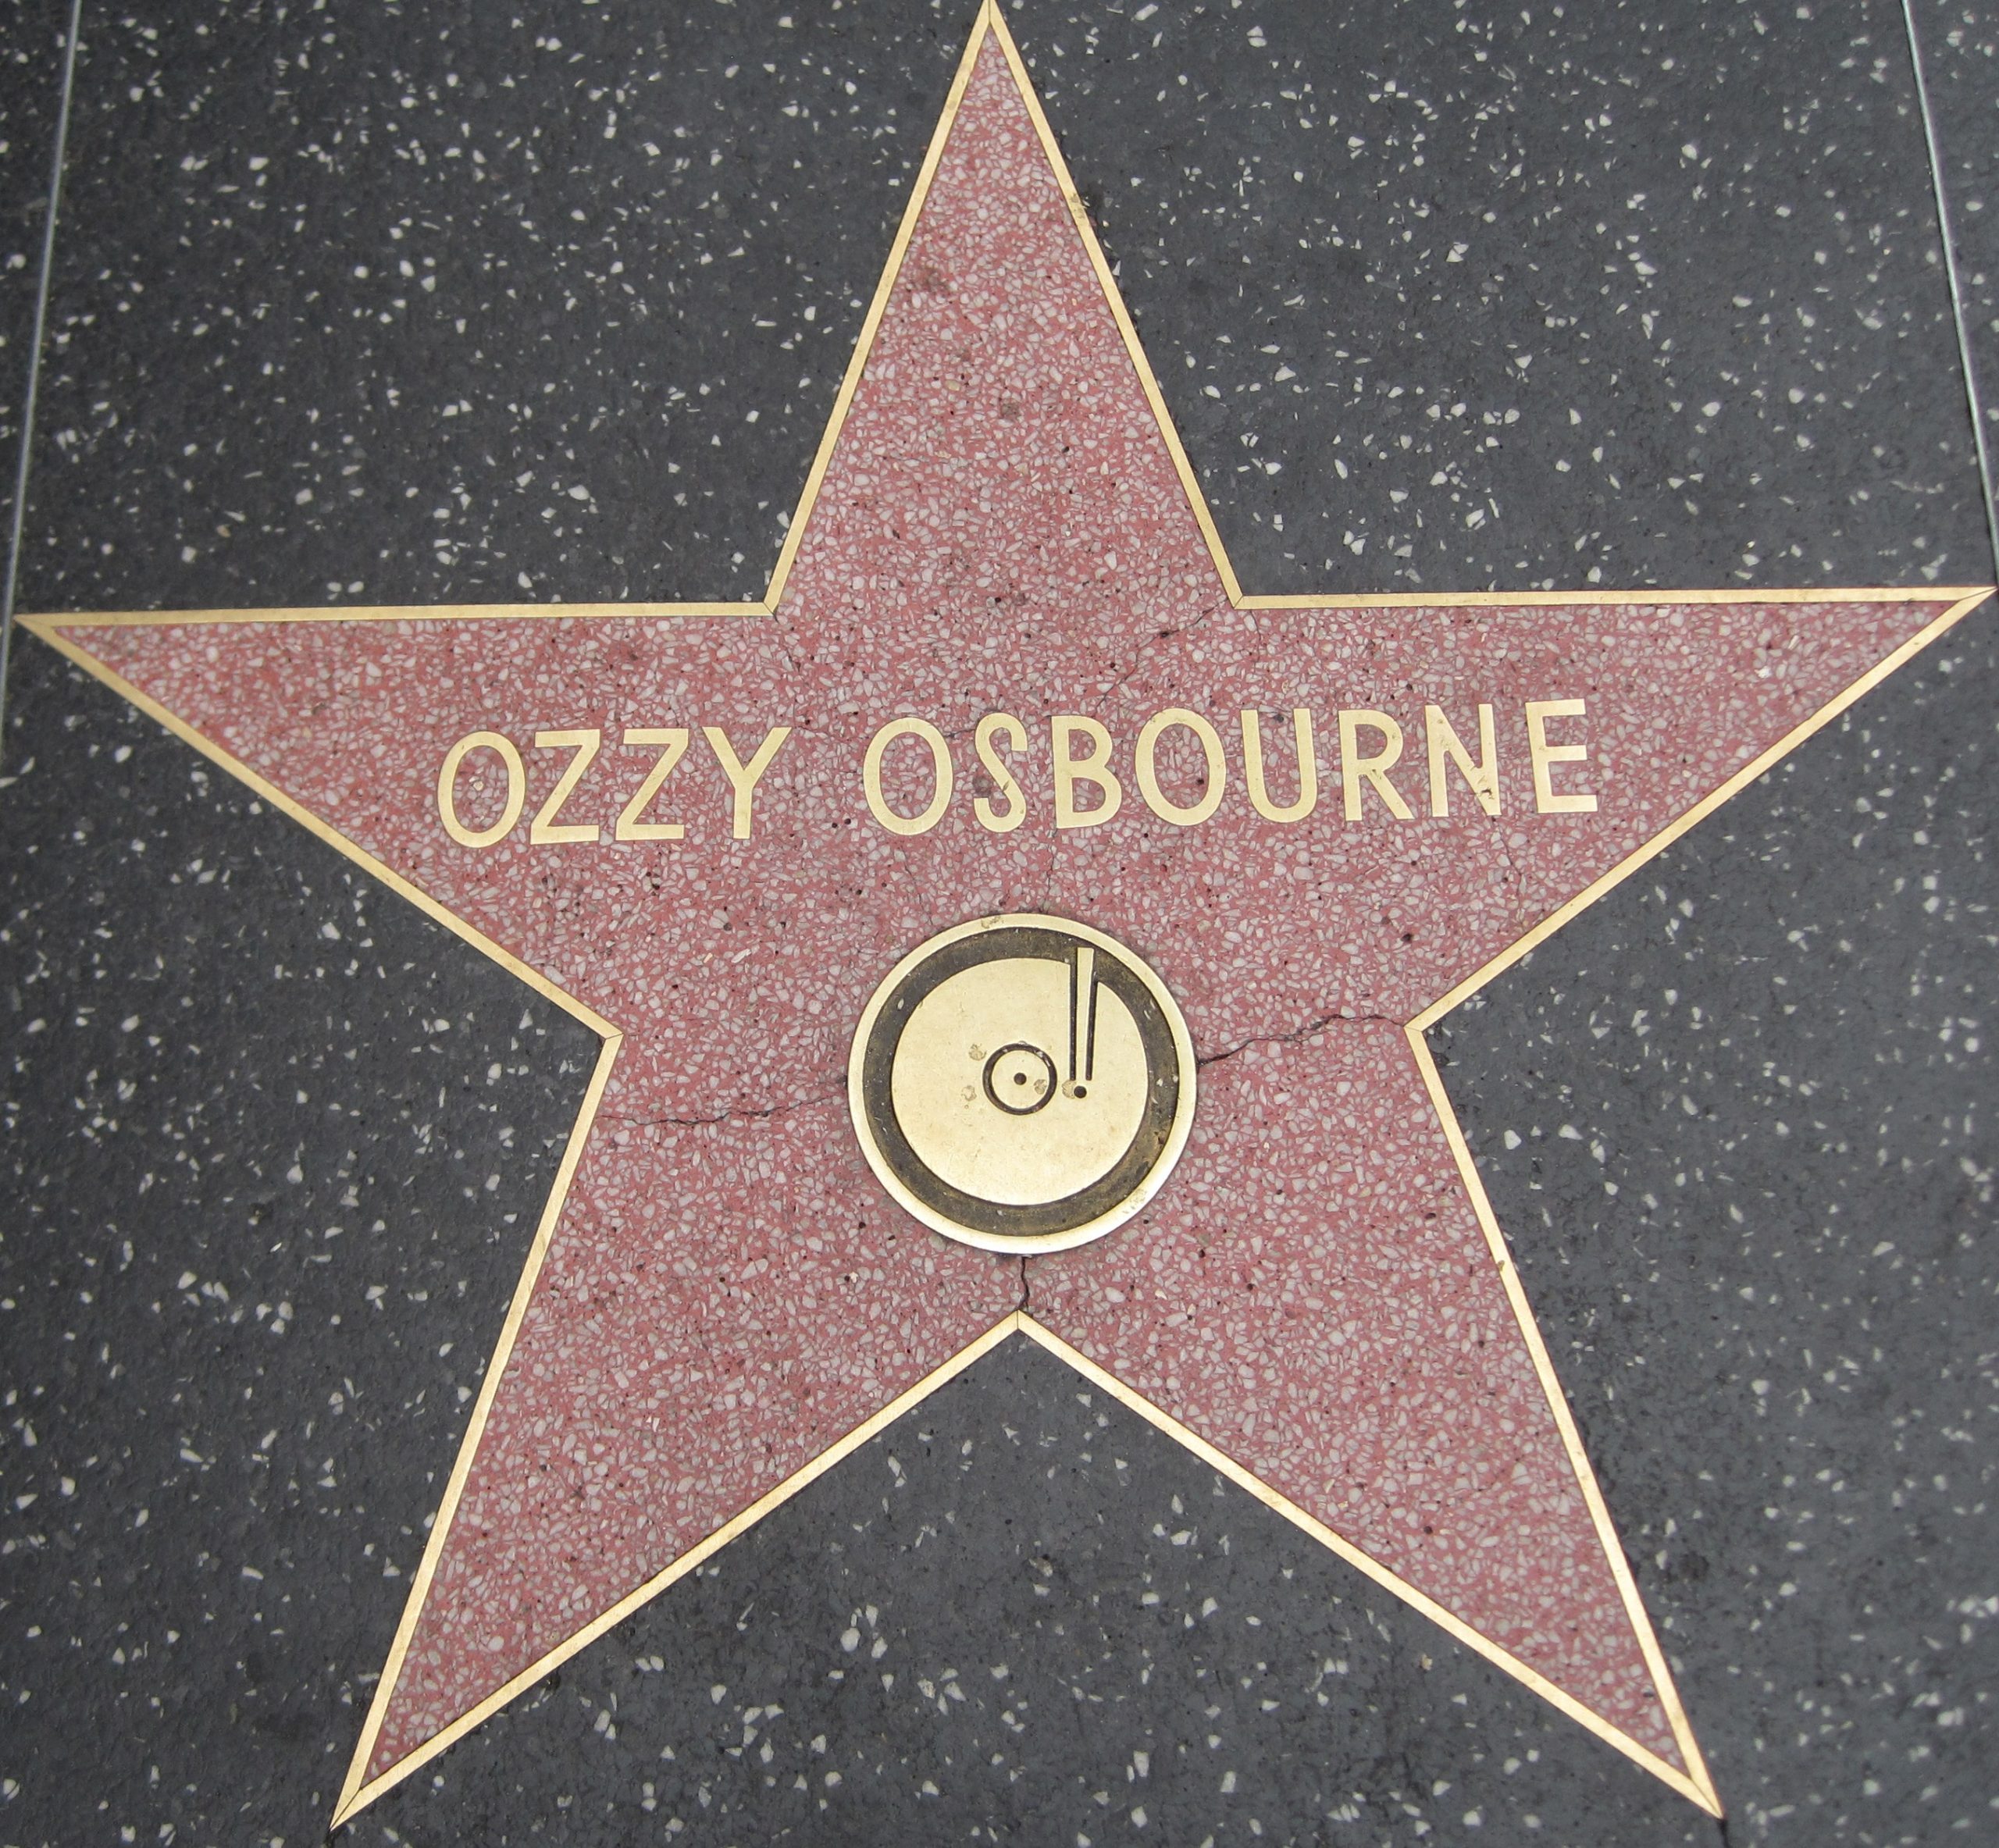 Ozzy Osbourne's Star at the Hollywood Walk of Fame